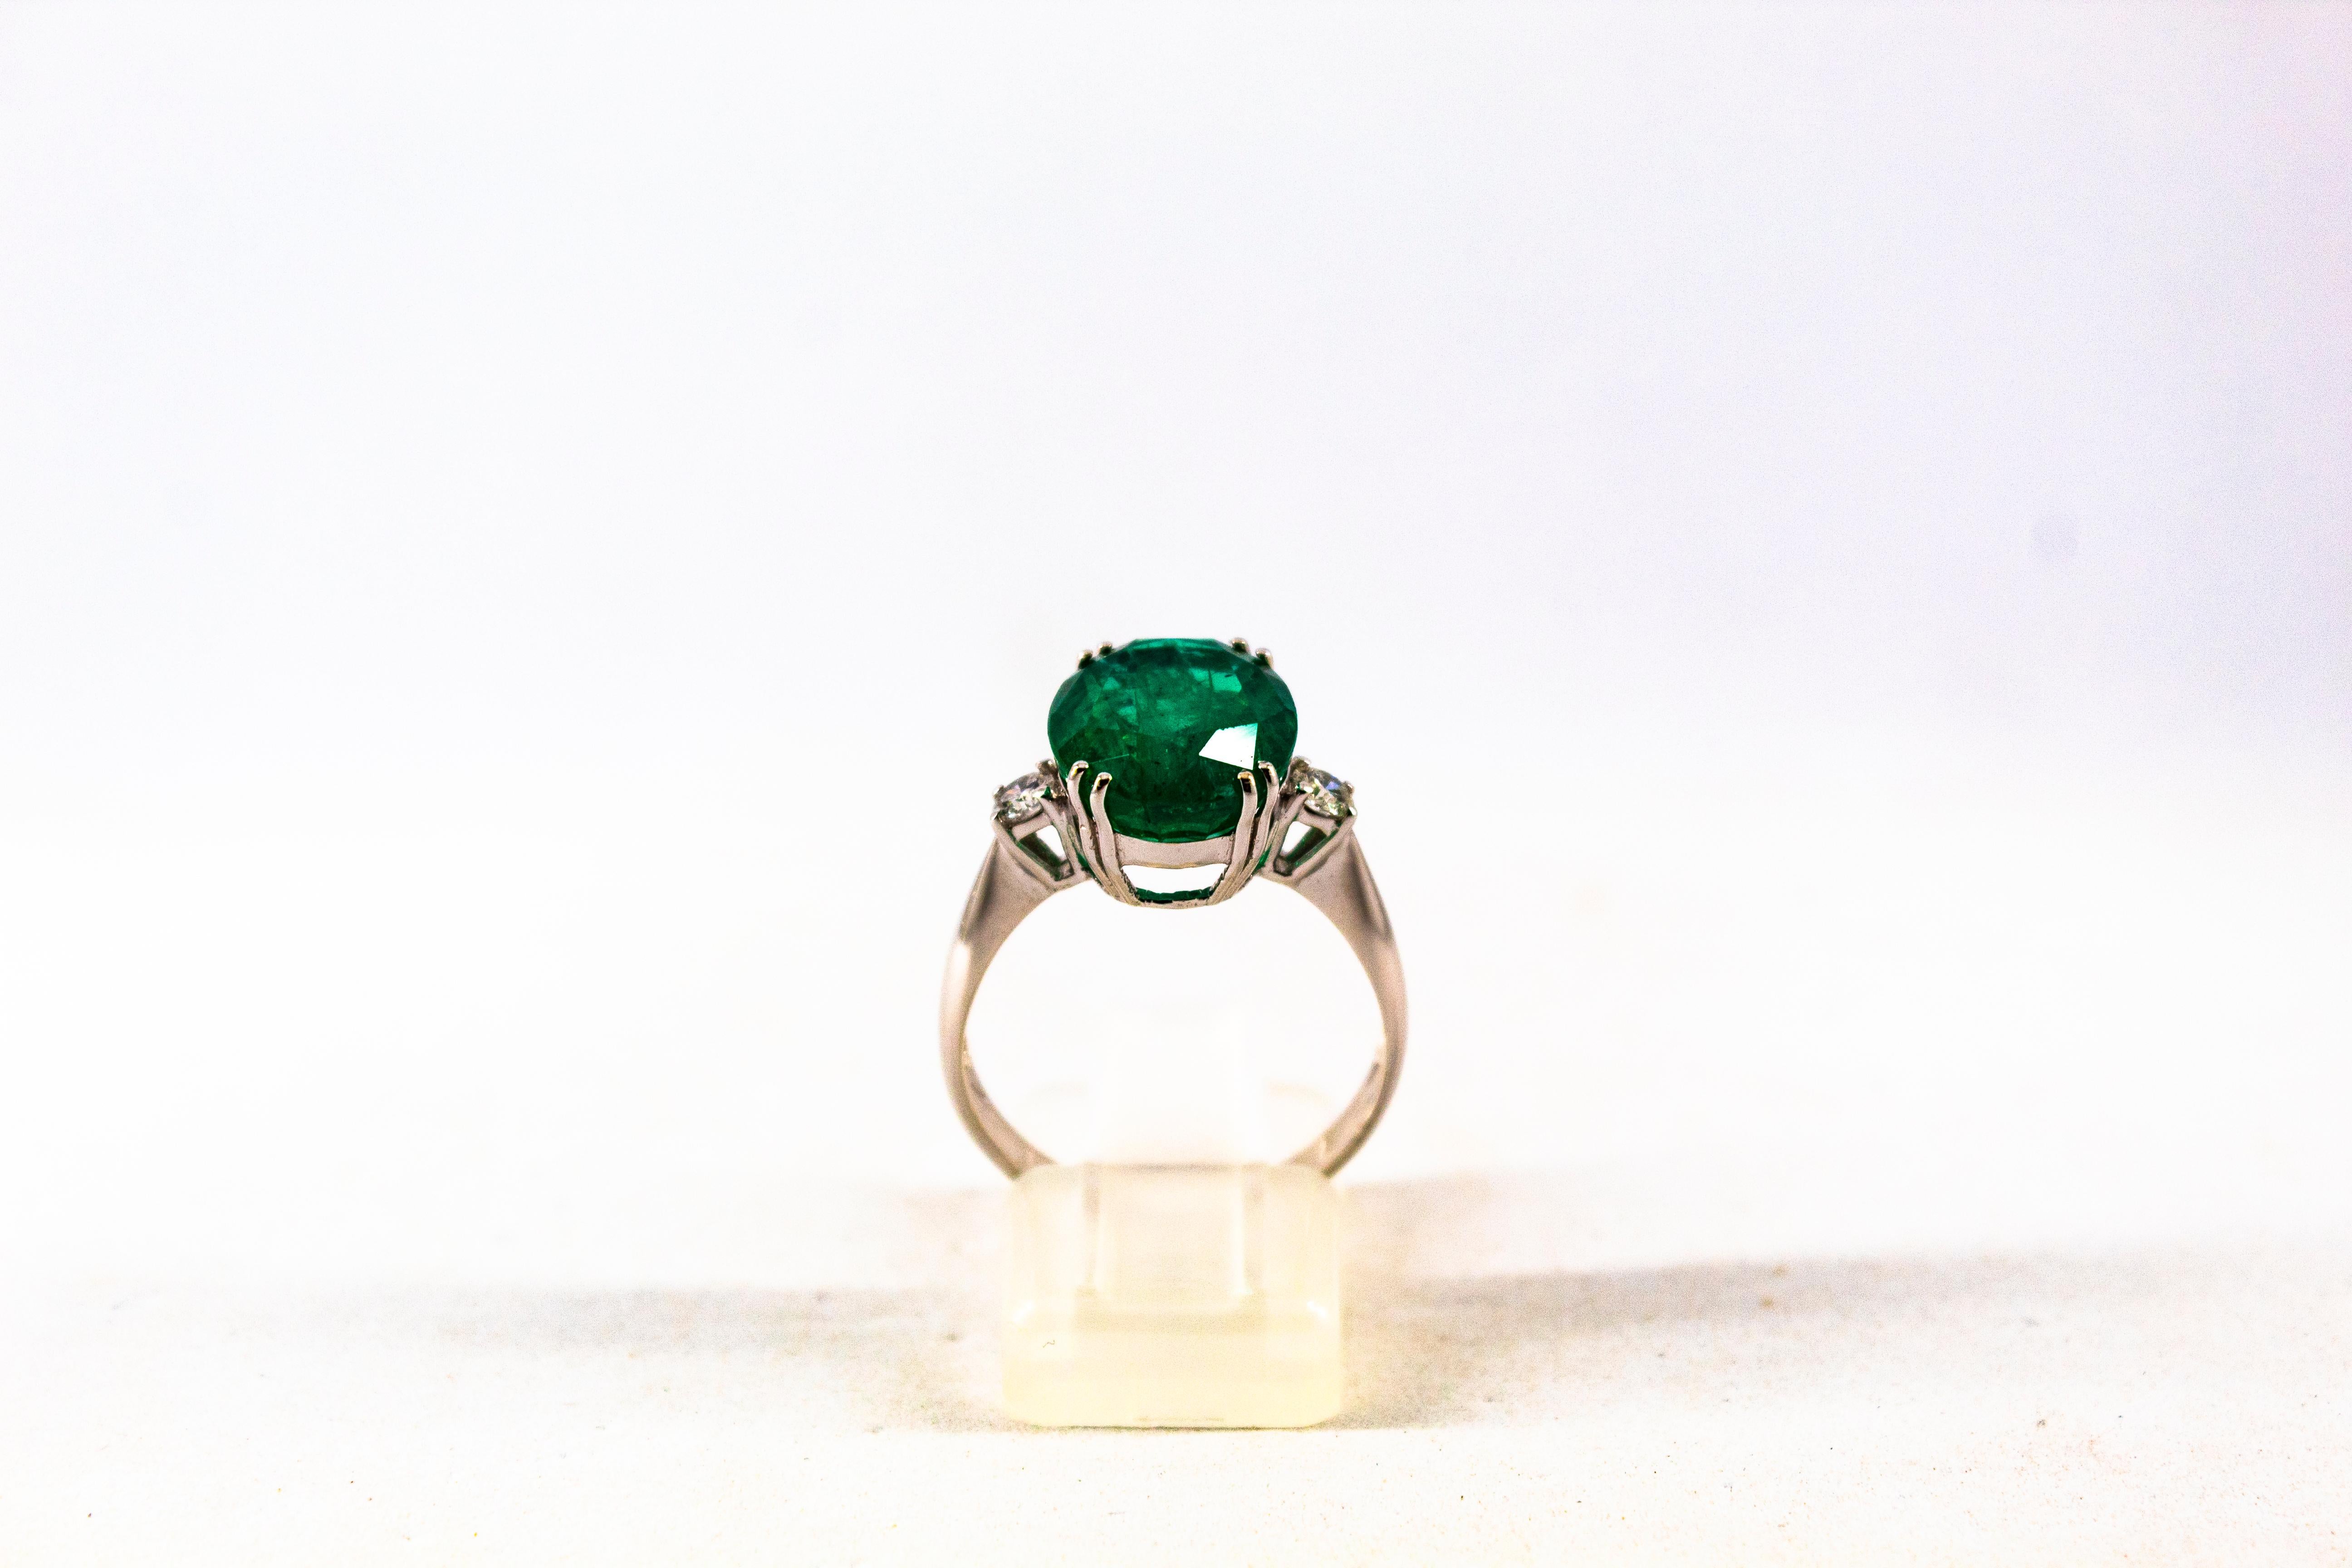 This Ring is made of 18K White Gold.
This Ring has 0.20 Carats of White Modern Round Cut Diamonds. Color: H-G Clarity: VVS1
This Ring has a 6.29 Carats Natural Zambia Oval Cut Emerald.
This Ring is inspired by Art Deco.
Size ITA: 17 USA: 8
We're a